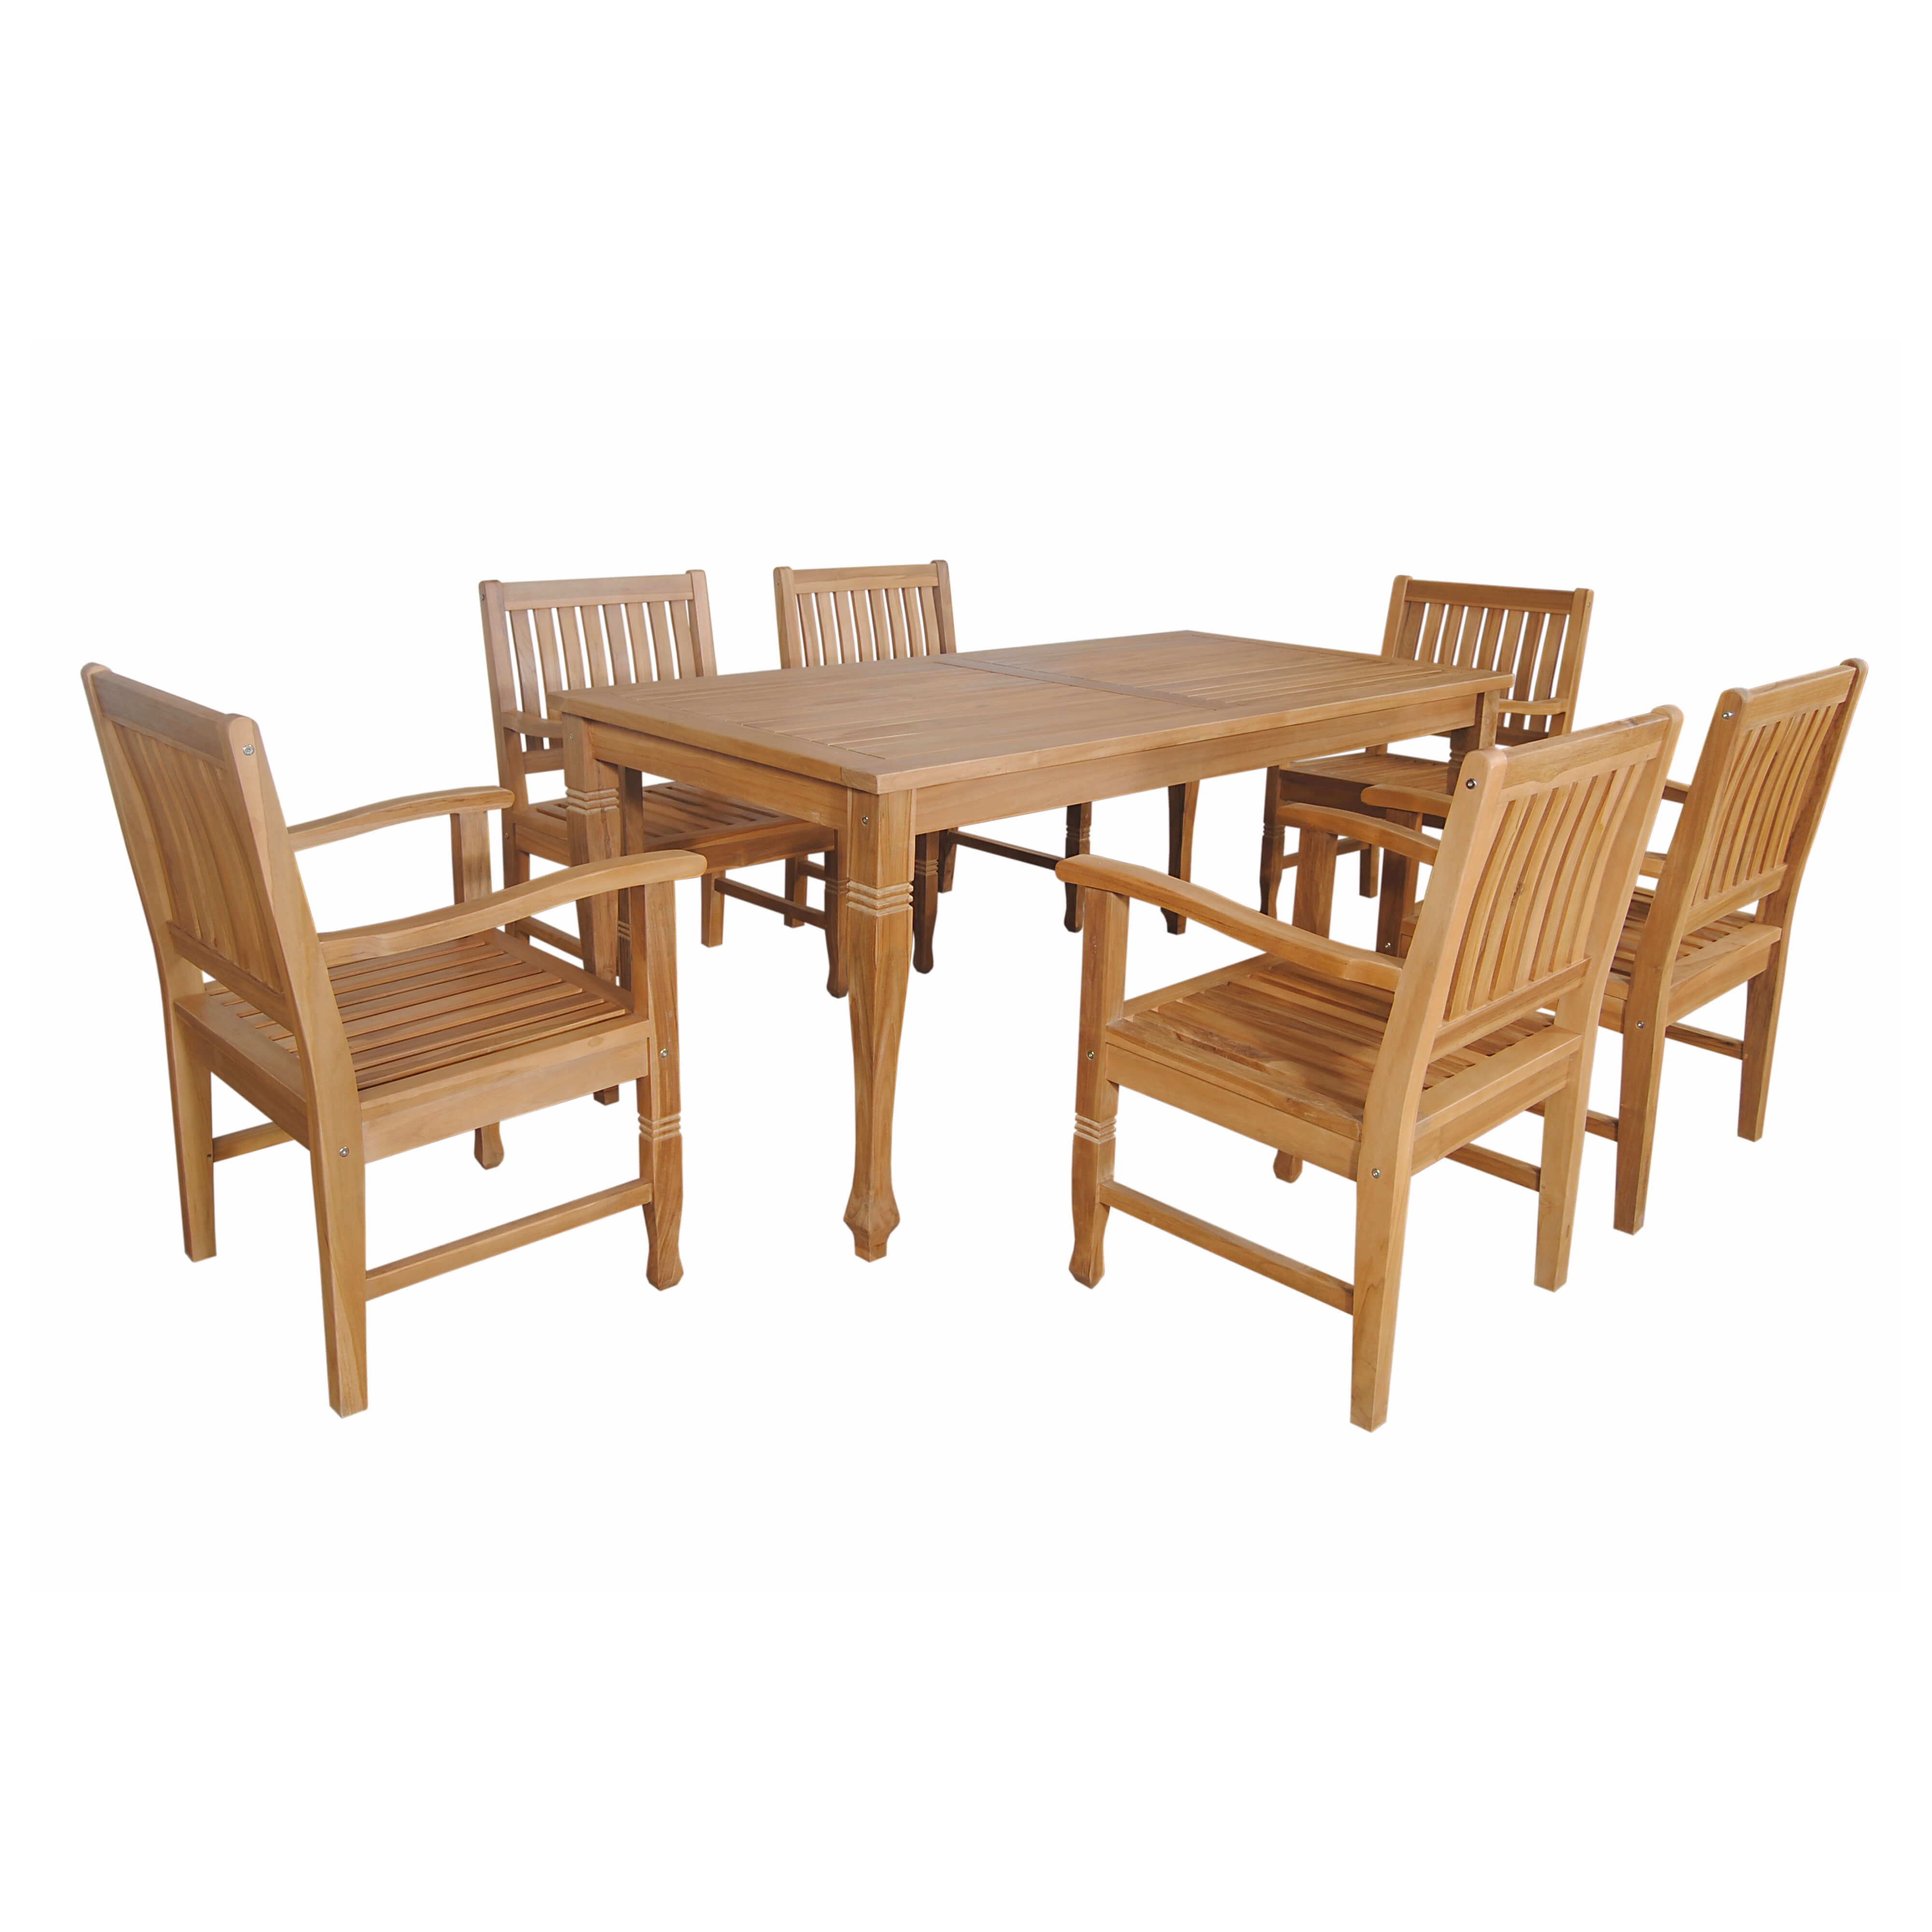 Picture of Anderson Teak Set-235 Rockford Dining Set - 7 Piece